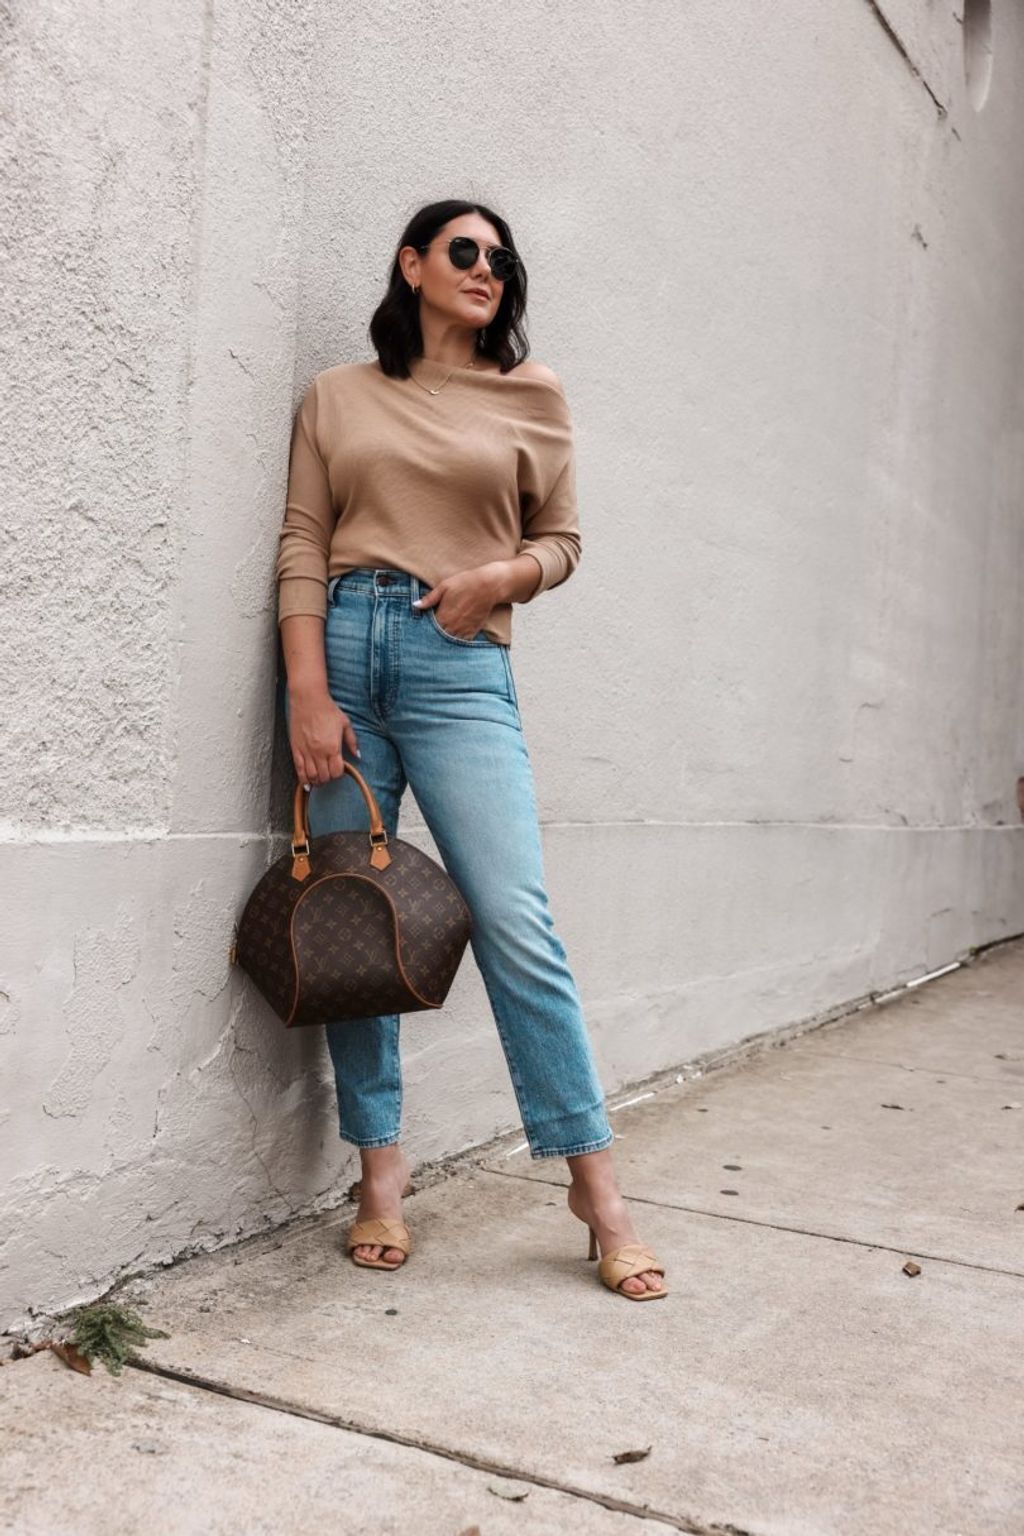 Kendi-Everyday-wearing-FP-Fuji-Off-the-Shoulder-Top-with-Madewell-Perfect-Vintage-jeans-outfit-10-810x1215